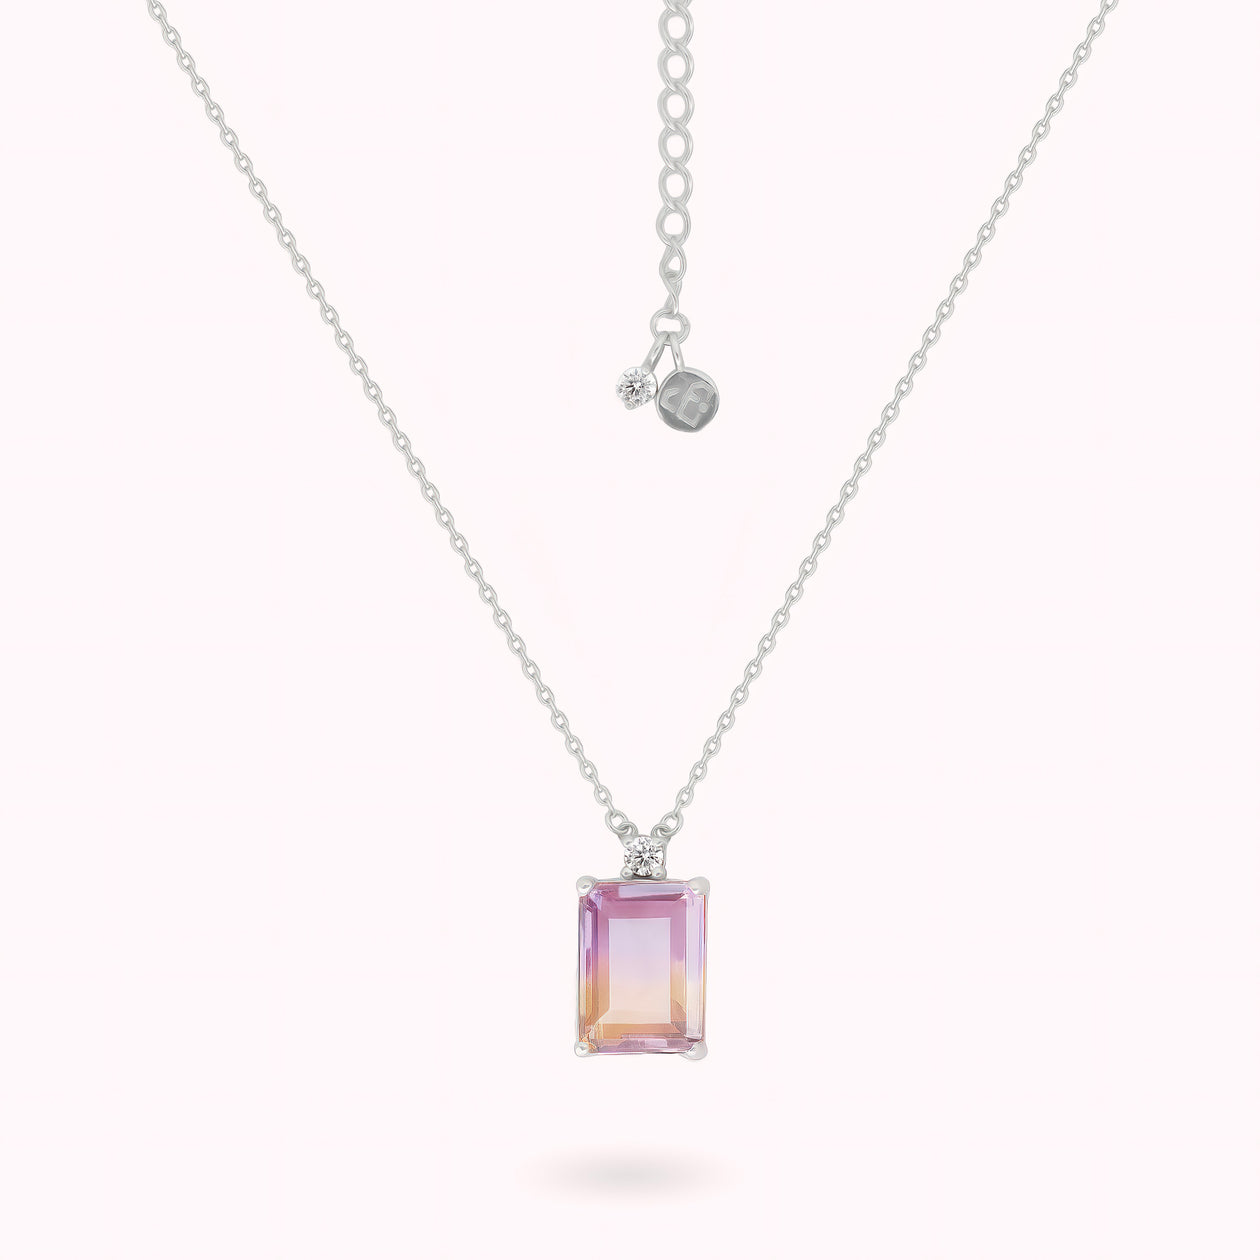 Discover This Magical Ametrine Gemstone Necklace - Silver Gold Vermeil